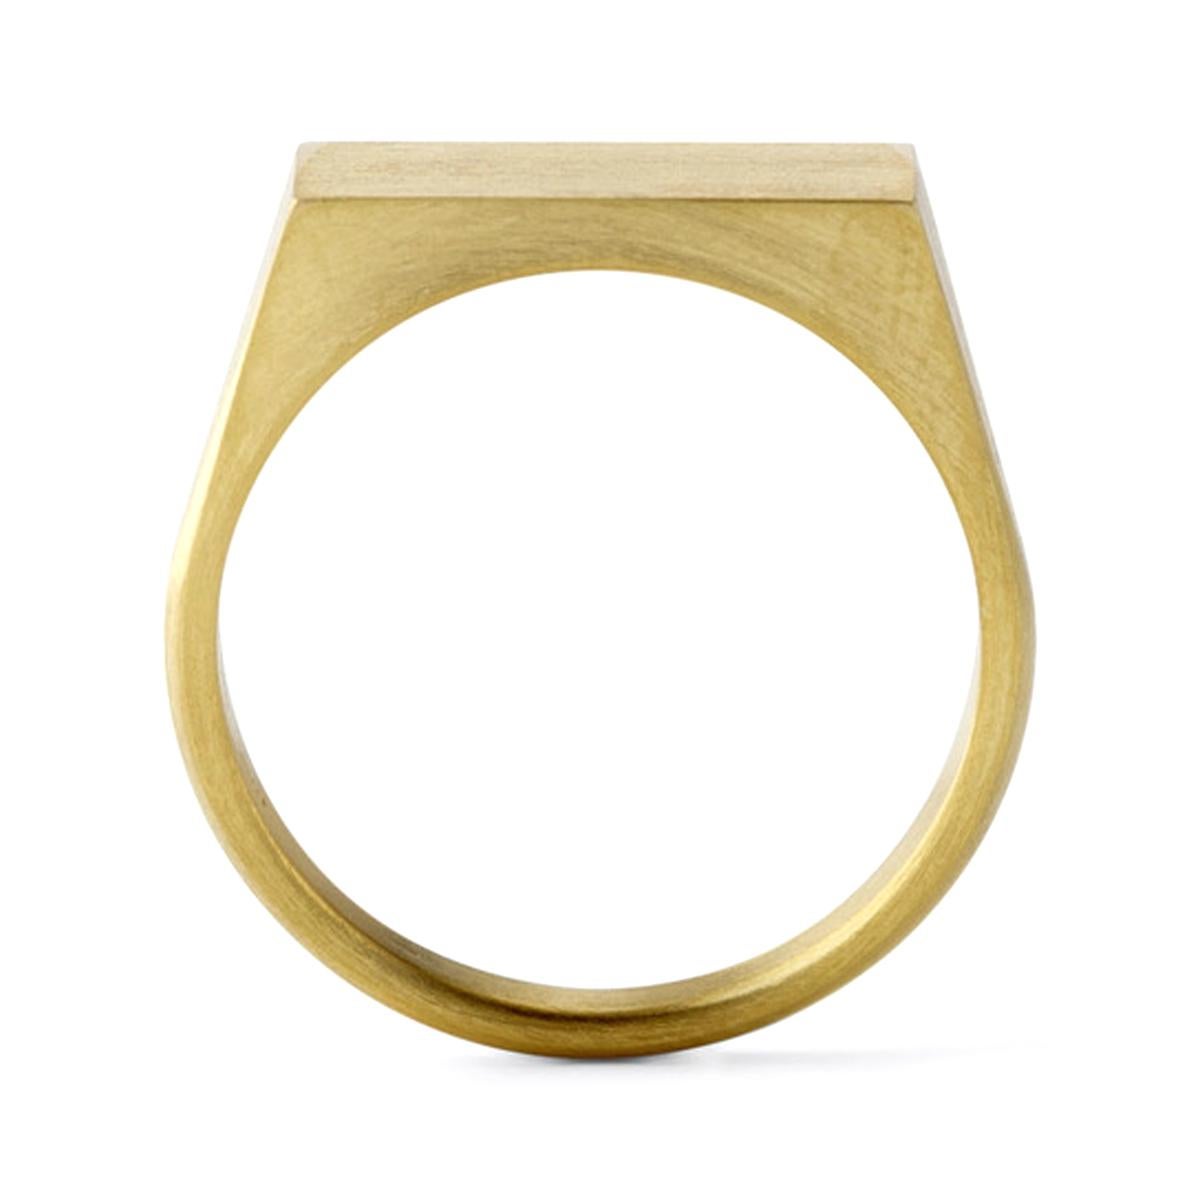 A classic rectangular signet ring. The signet surface and inside the ring band is polished in contrast with the surface of the ring band which is matte.

Signet top measurements: 11.5mm x 4.7mm
This item is made-to-order.

Items made to order and